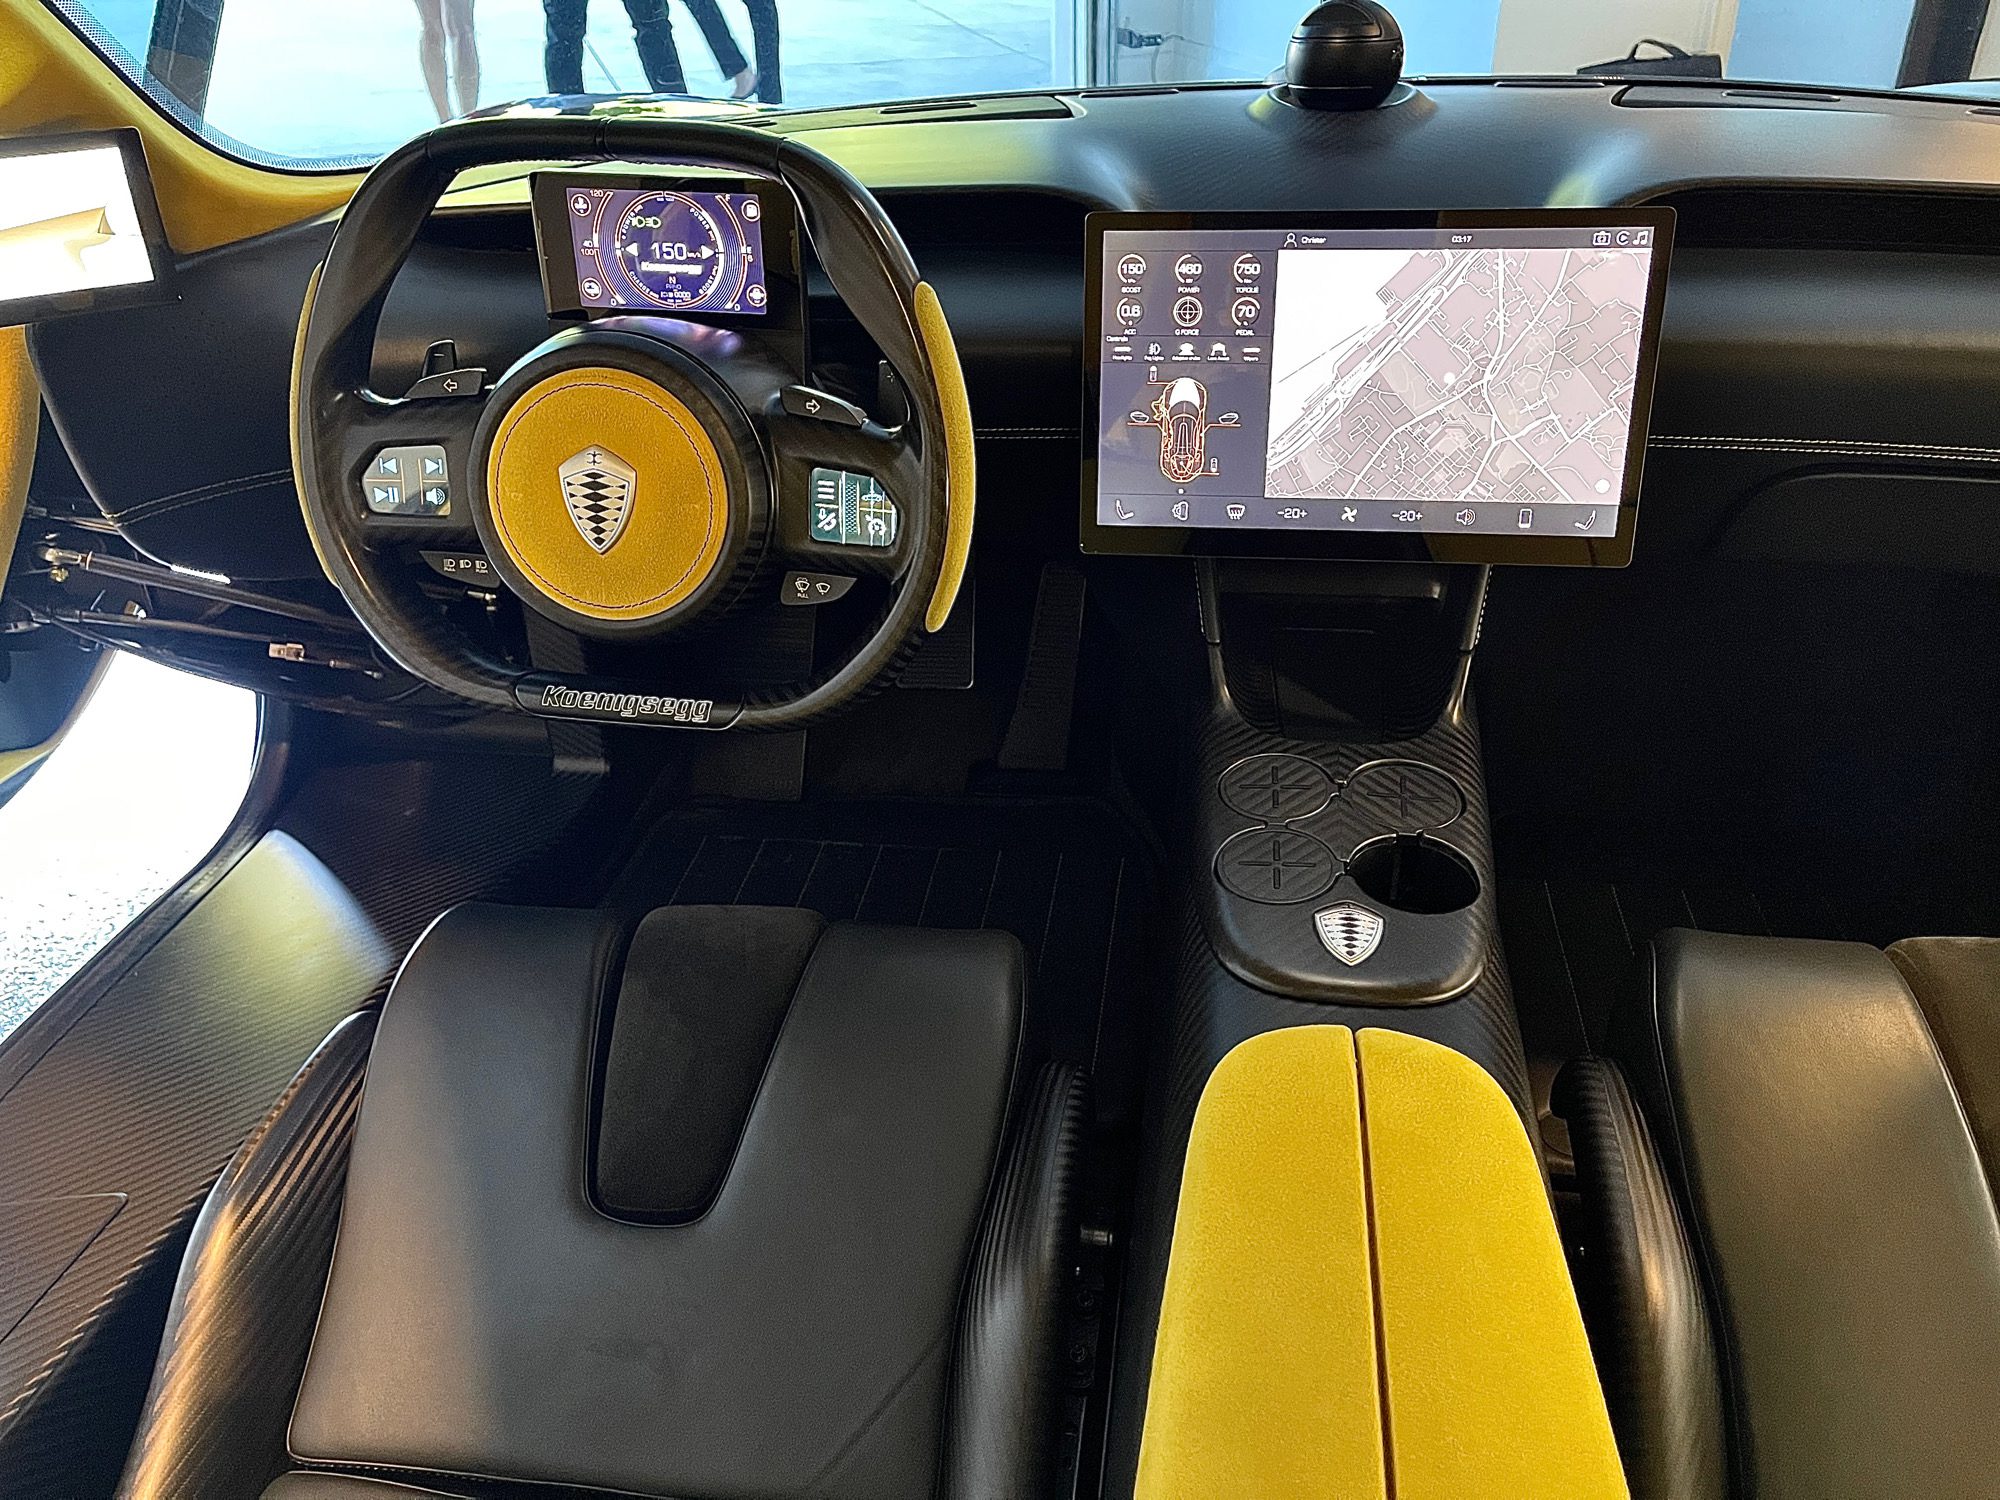 View of the dashboard in the new Koenigsegg Gemera